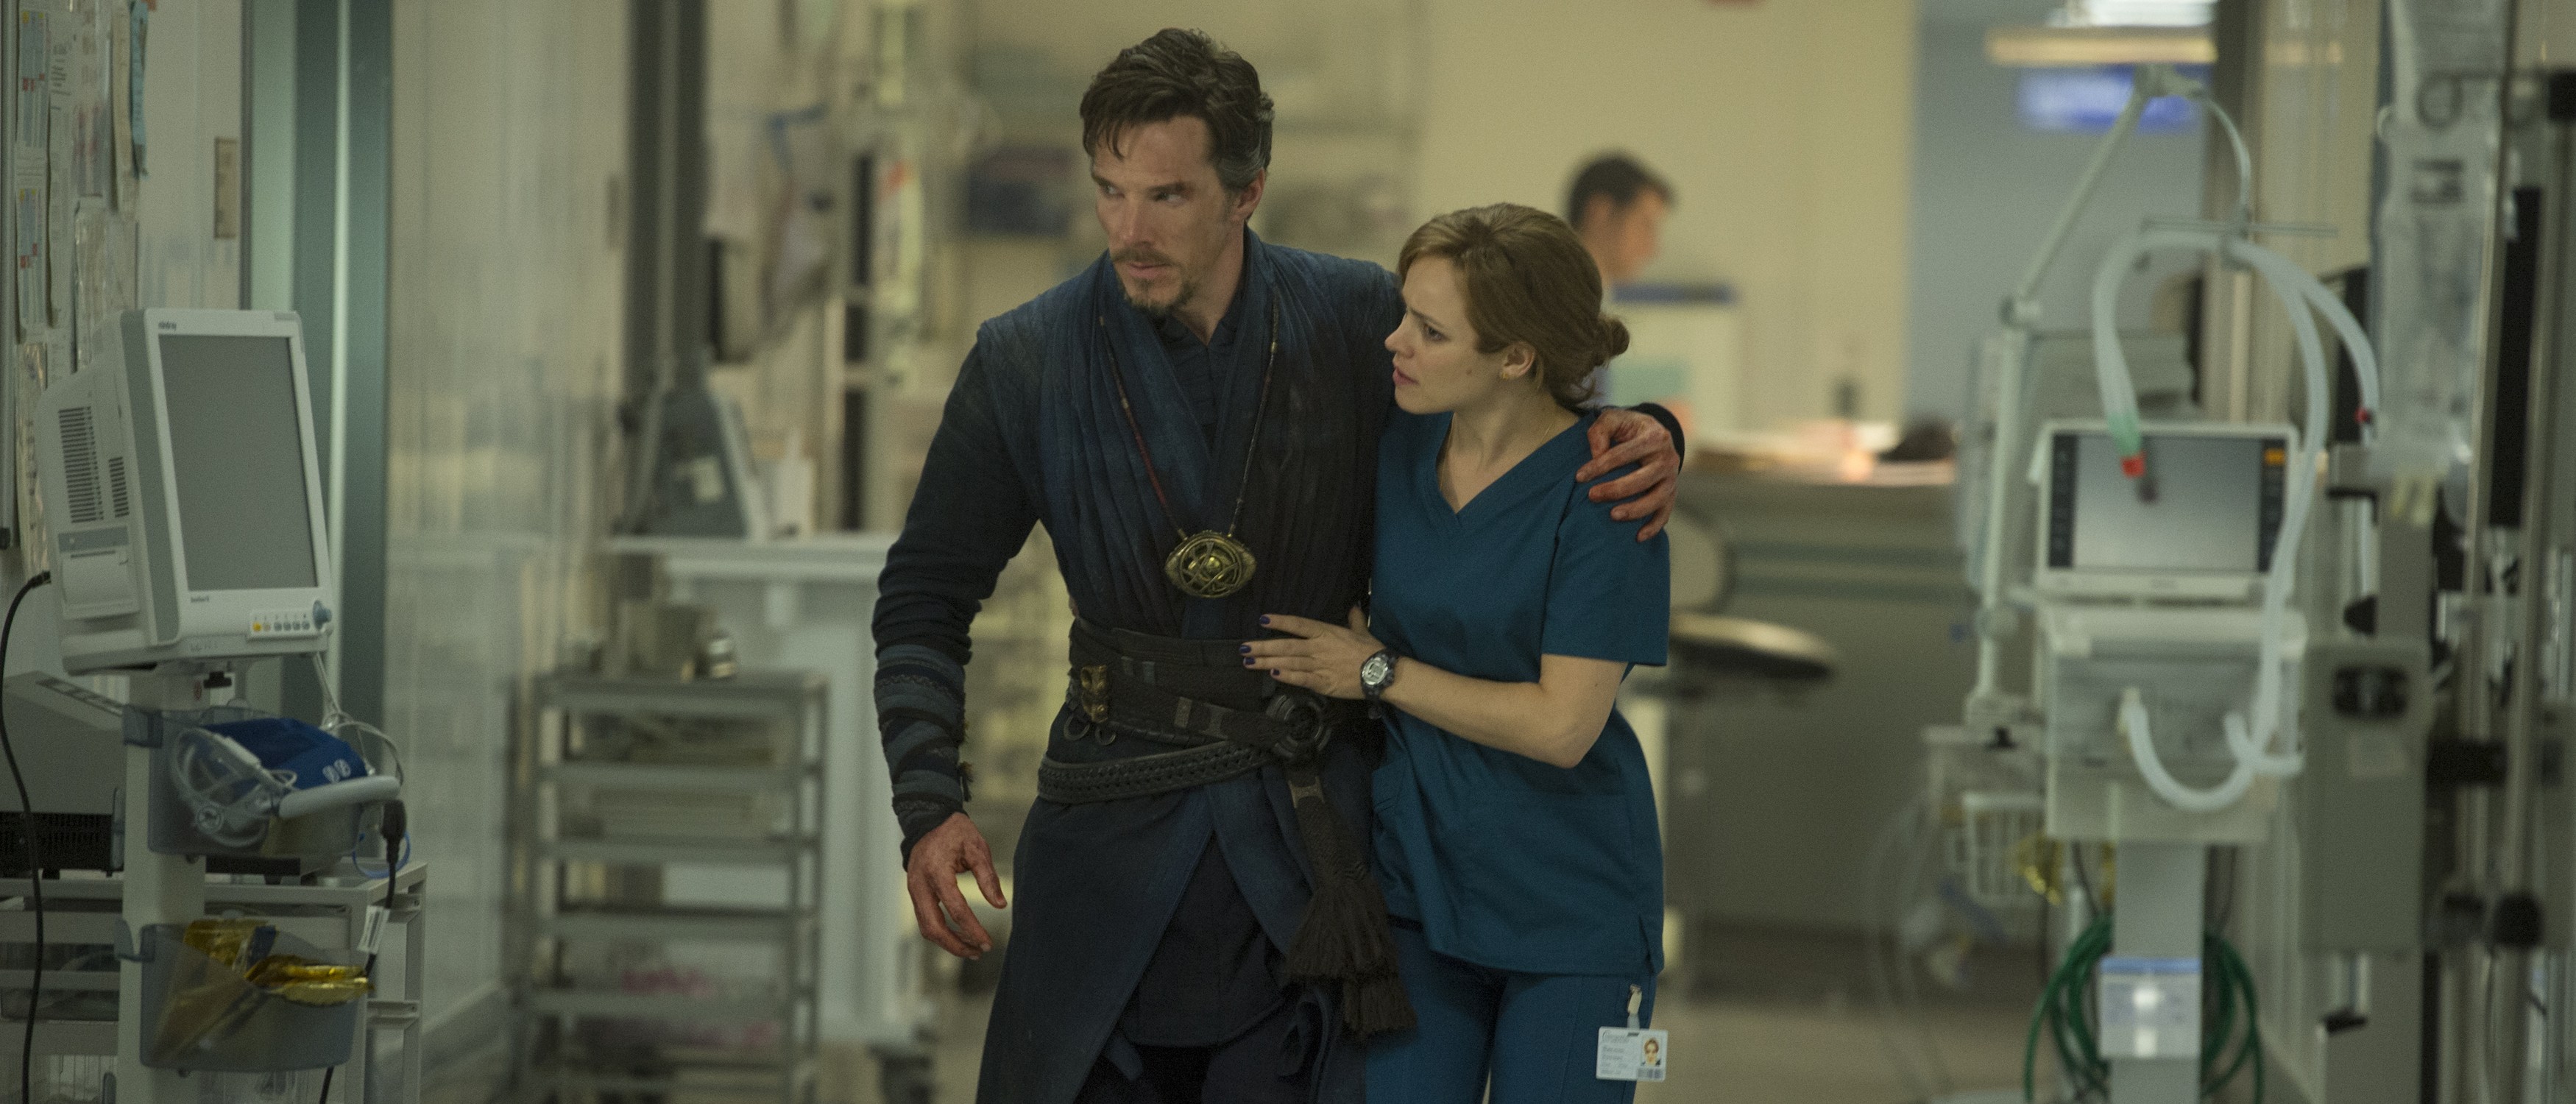 Doctor Strange Movie Review: The Spoiler-Filled Pros and Cons of Strange's Cinematic Debut